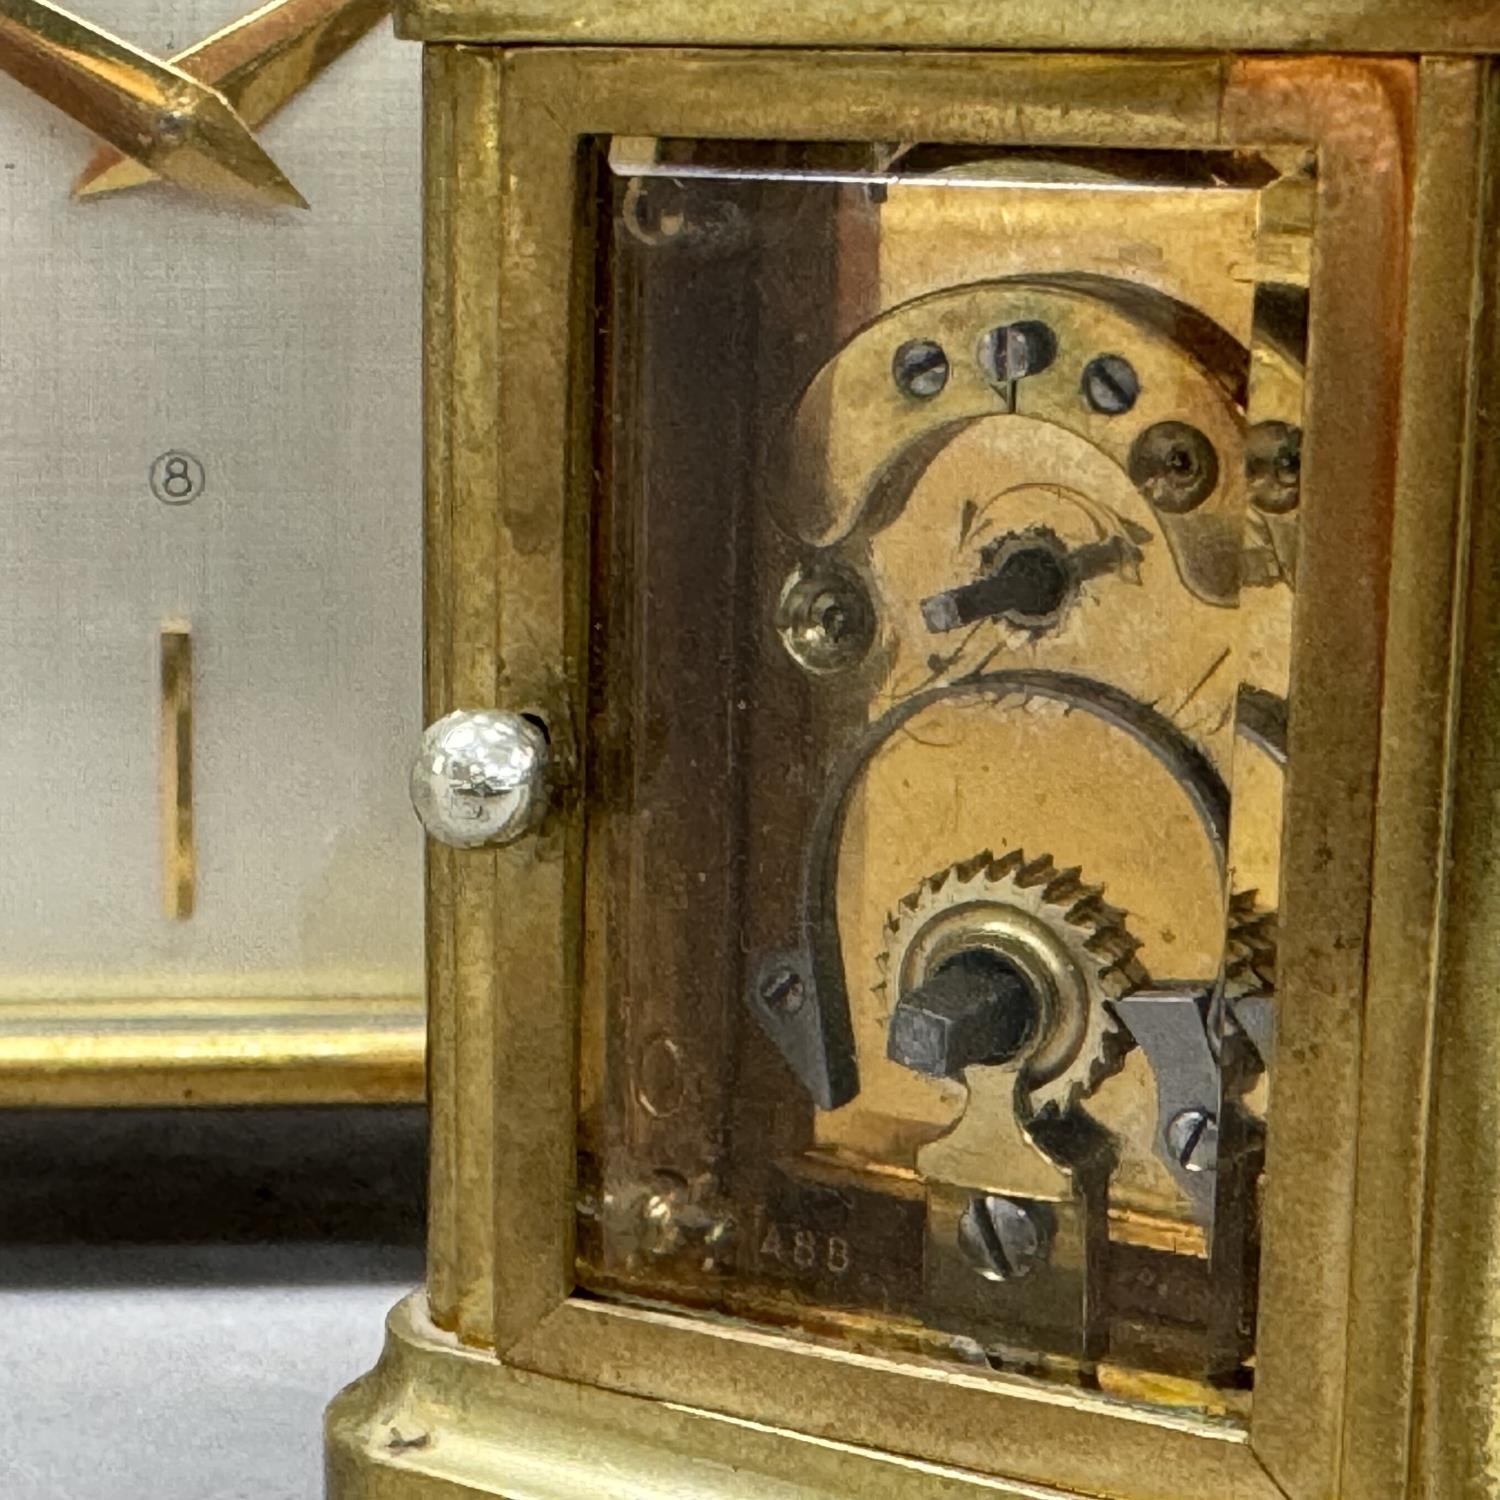 A late 19th/early 20th century miniature carriage clock, 8-day lever movement in fine light brass - Image 2 of 2